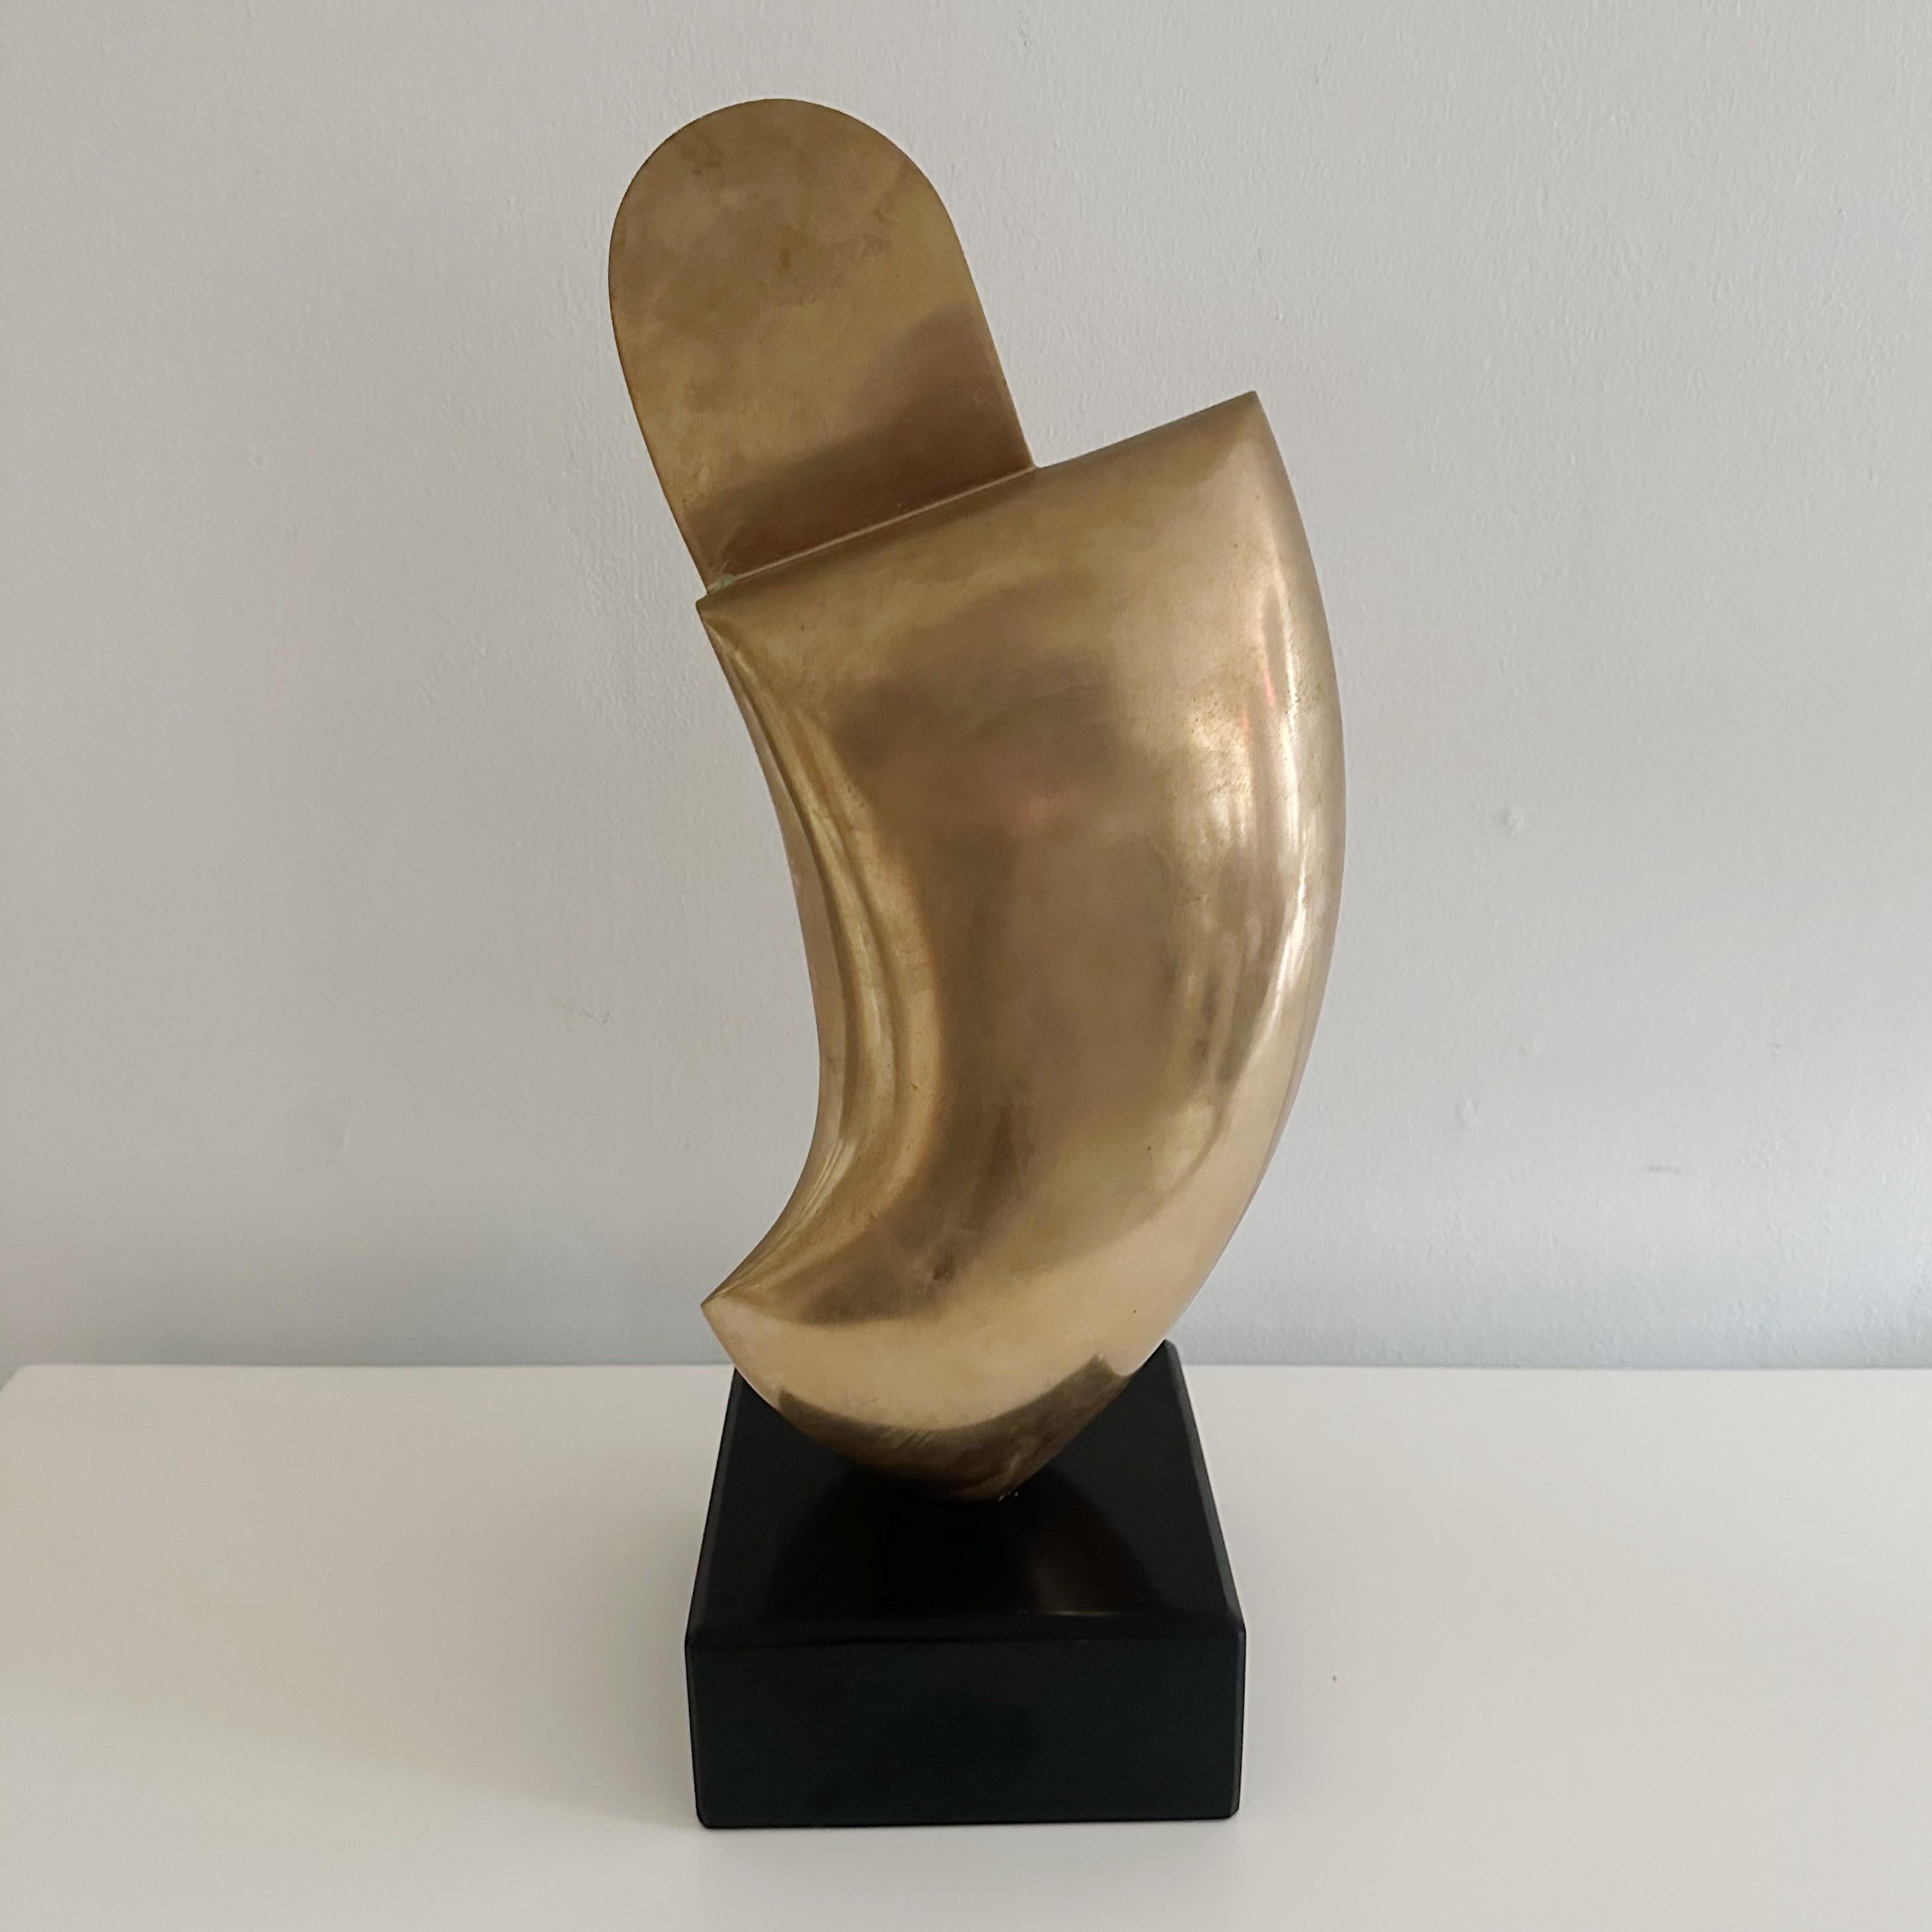 Biomorphic solid bronze sculpture by world renowned artist Antonio Kieff, signed in an edition of 2 of 9 mounted on a black granite base.  Purchased by the original owner in 1974.

Born in Madrid Spain, later moving to Canada, Antonio Kieffs works